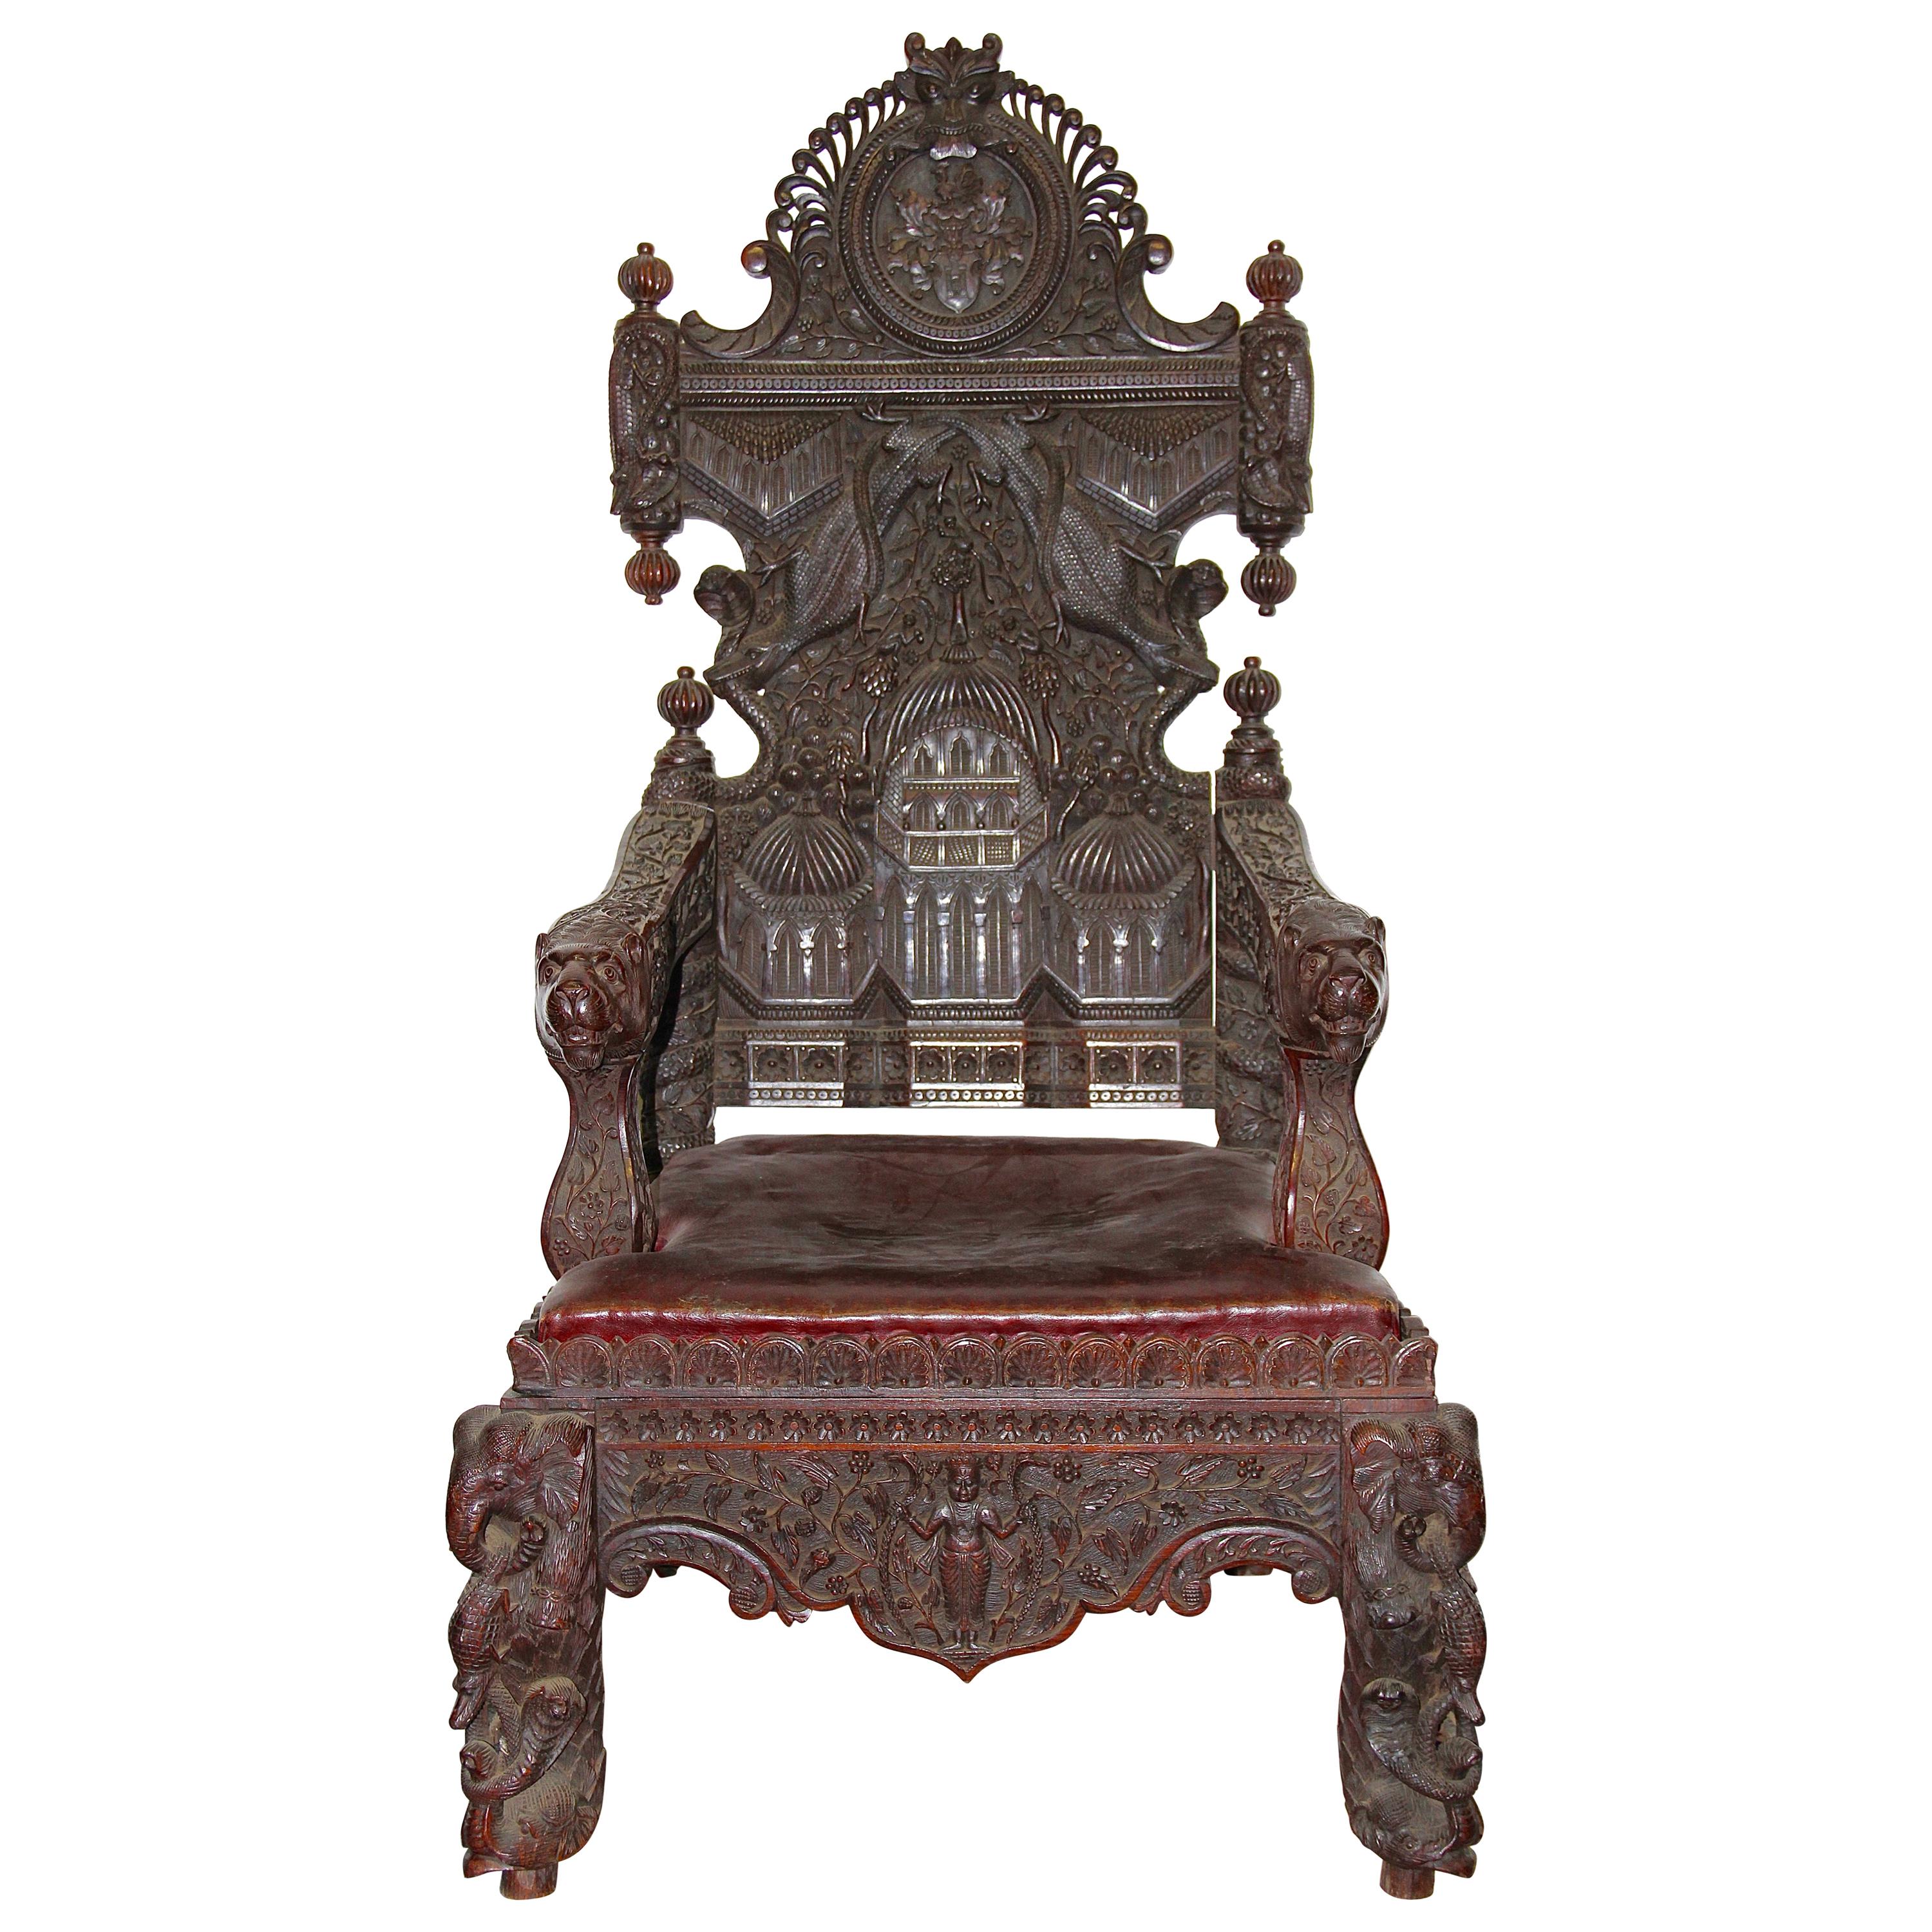 Large and Very Decorative Antique Throne Armchair, 19th Century Solid Wood